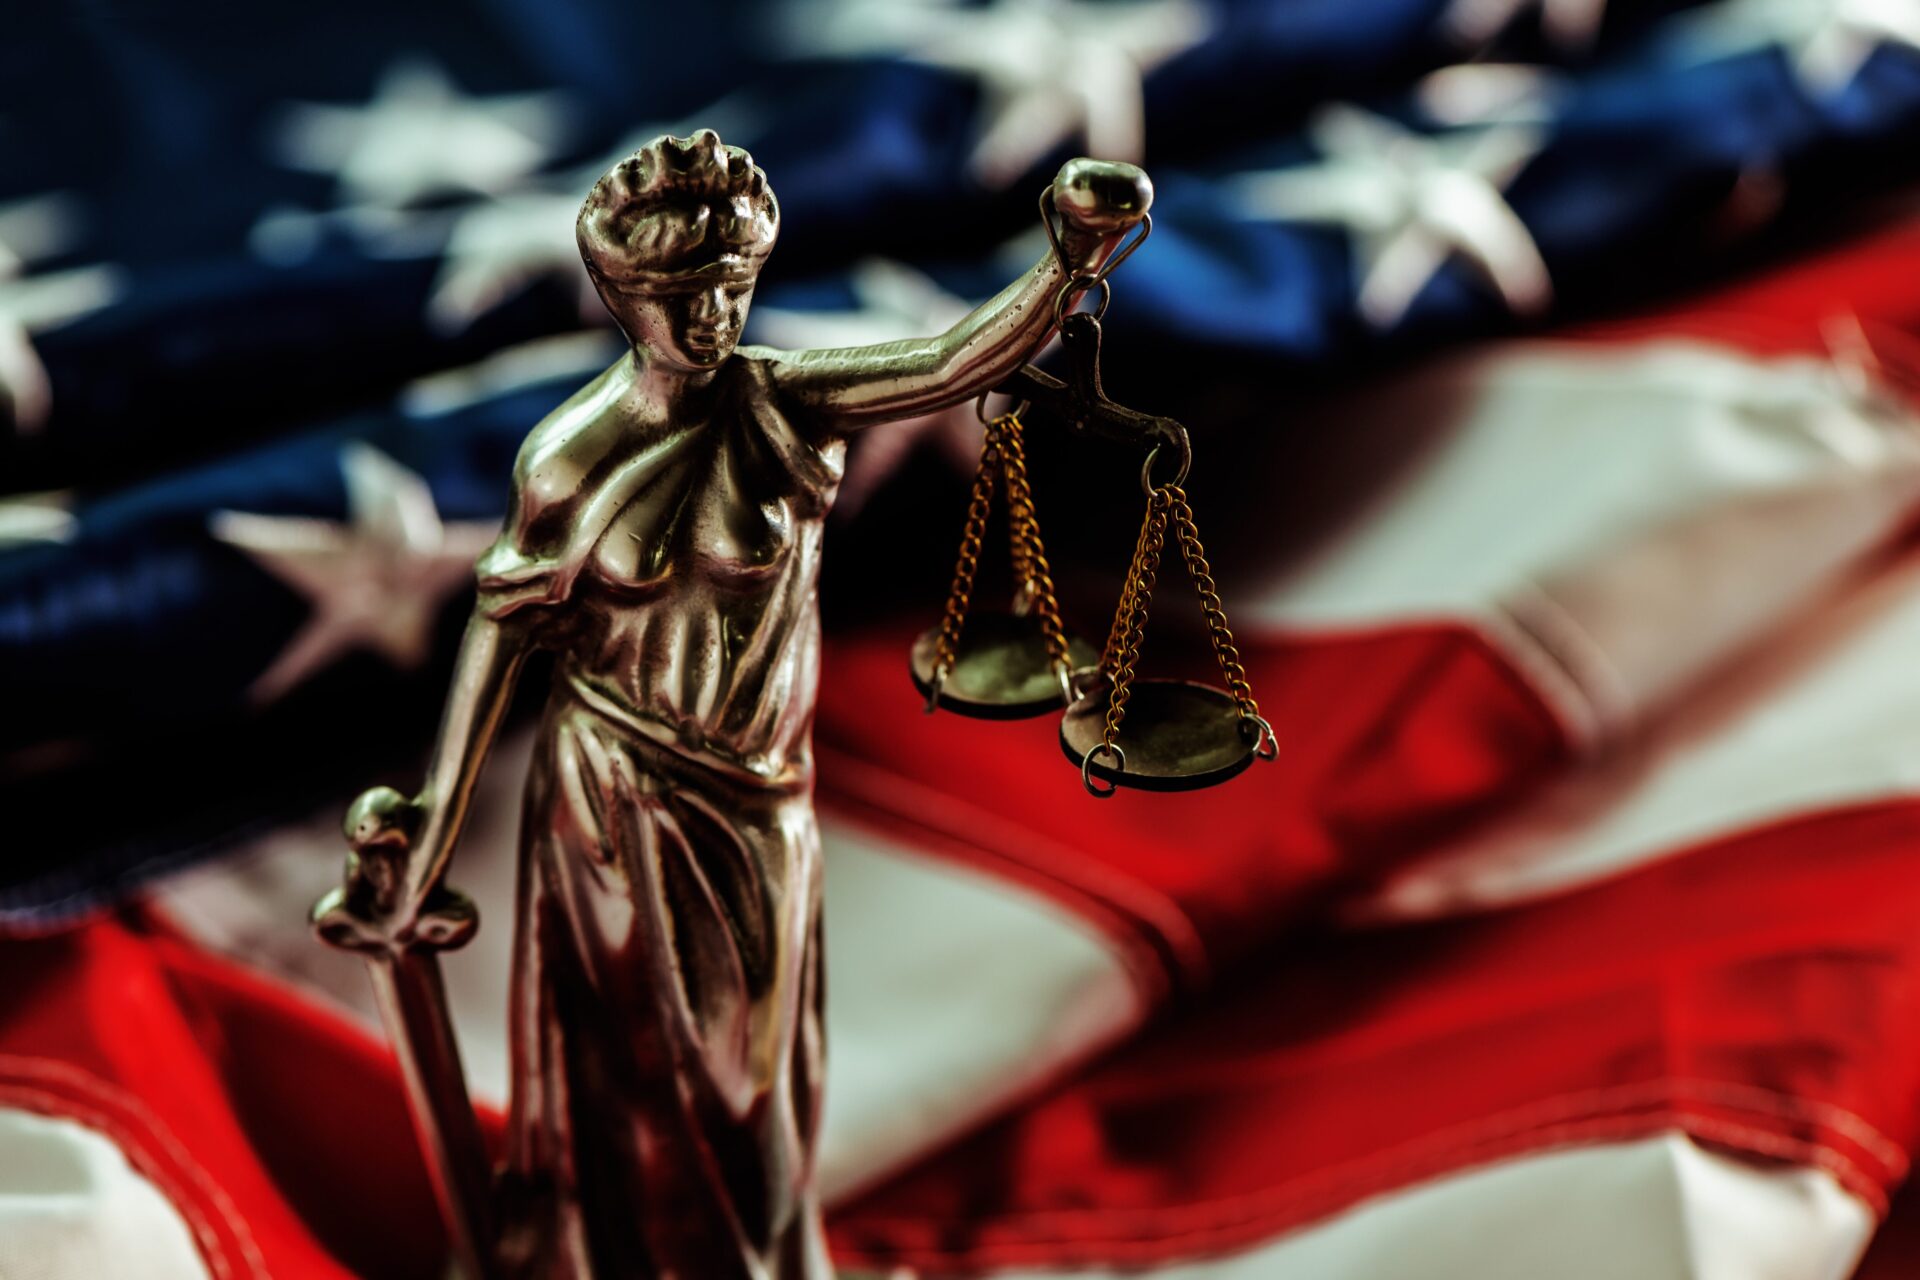 Theft law attorney in Franklin, TN. Theft Crime lawyers near me. Law and Justice with US Flag